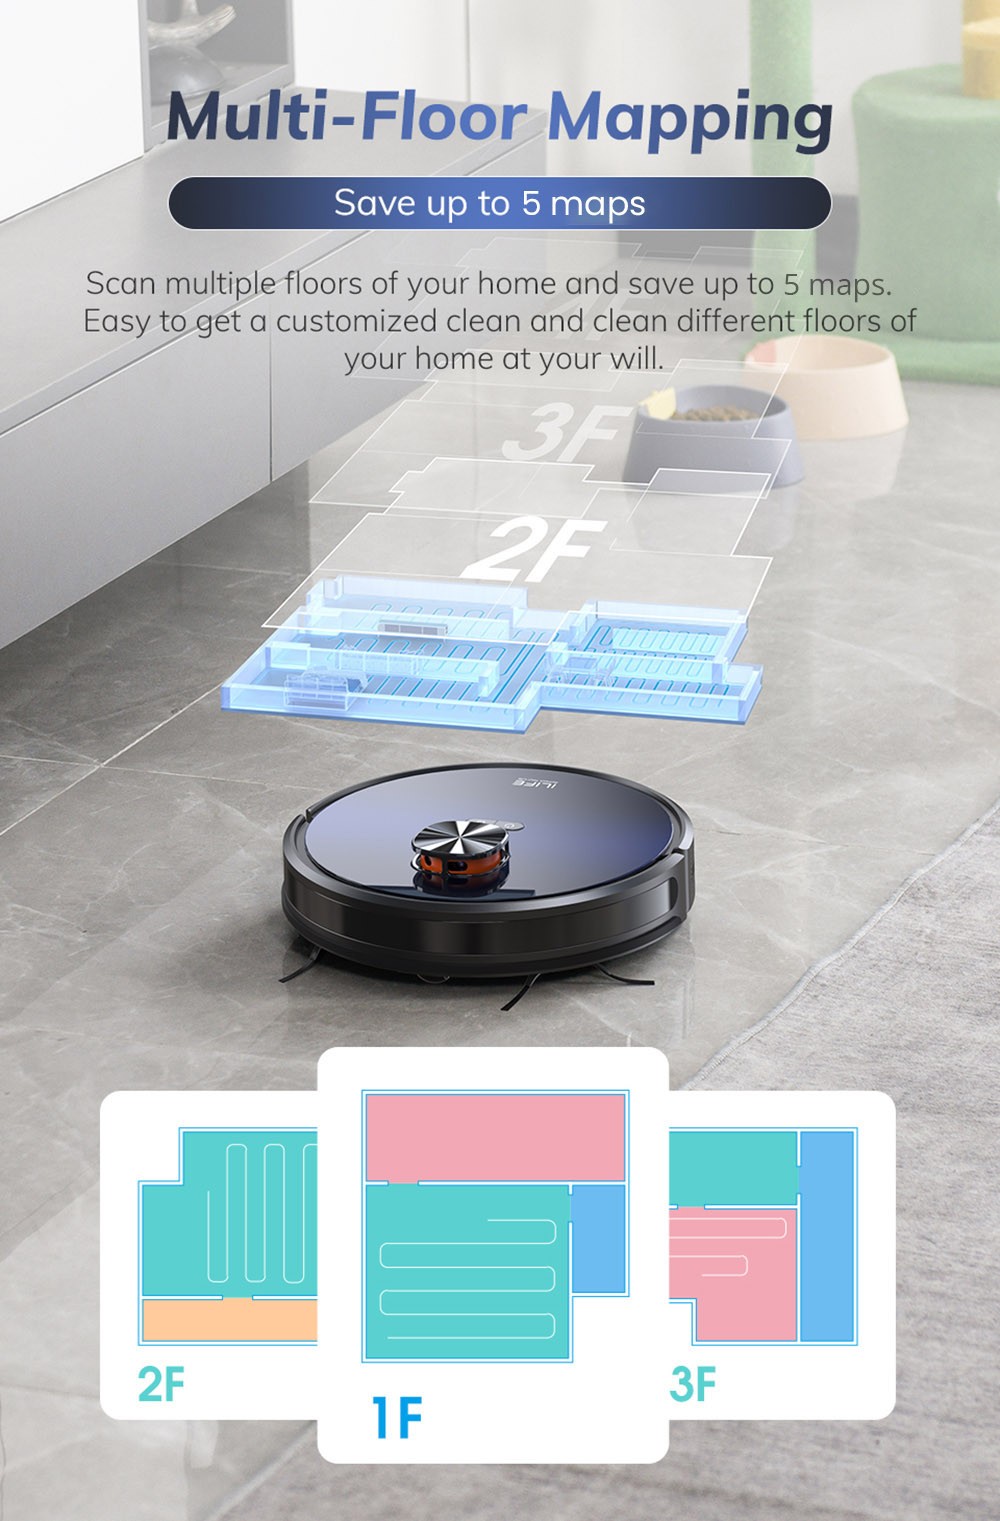 ILIFE T10s Robot Vacuum Cleaner, 2 in 1 Vacuum and Mop, Self-Emptying Station, 3000Pa Suction, 2.5L Dust Bag, LDS Navigation, 150 mins Runtime, Save up to 5 Maps, App & Voice Control - Gradient Blue